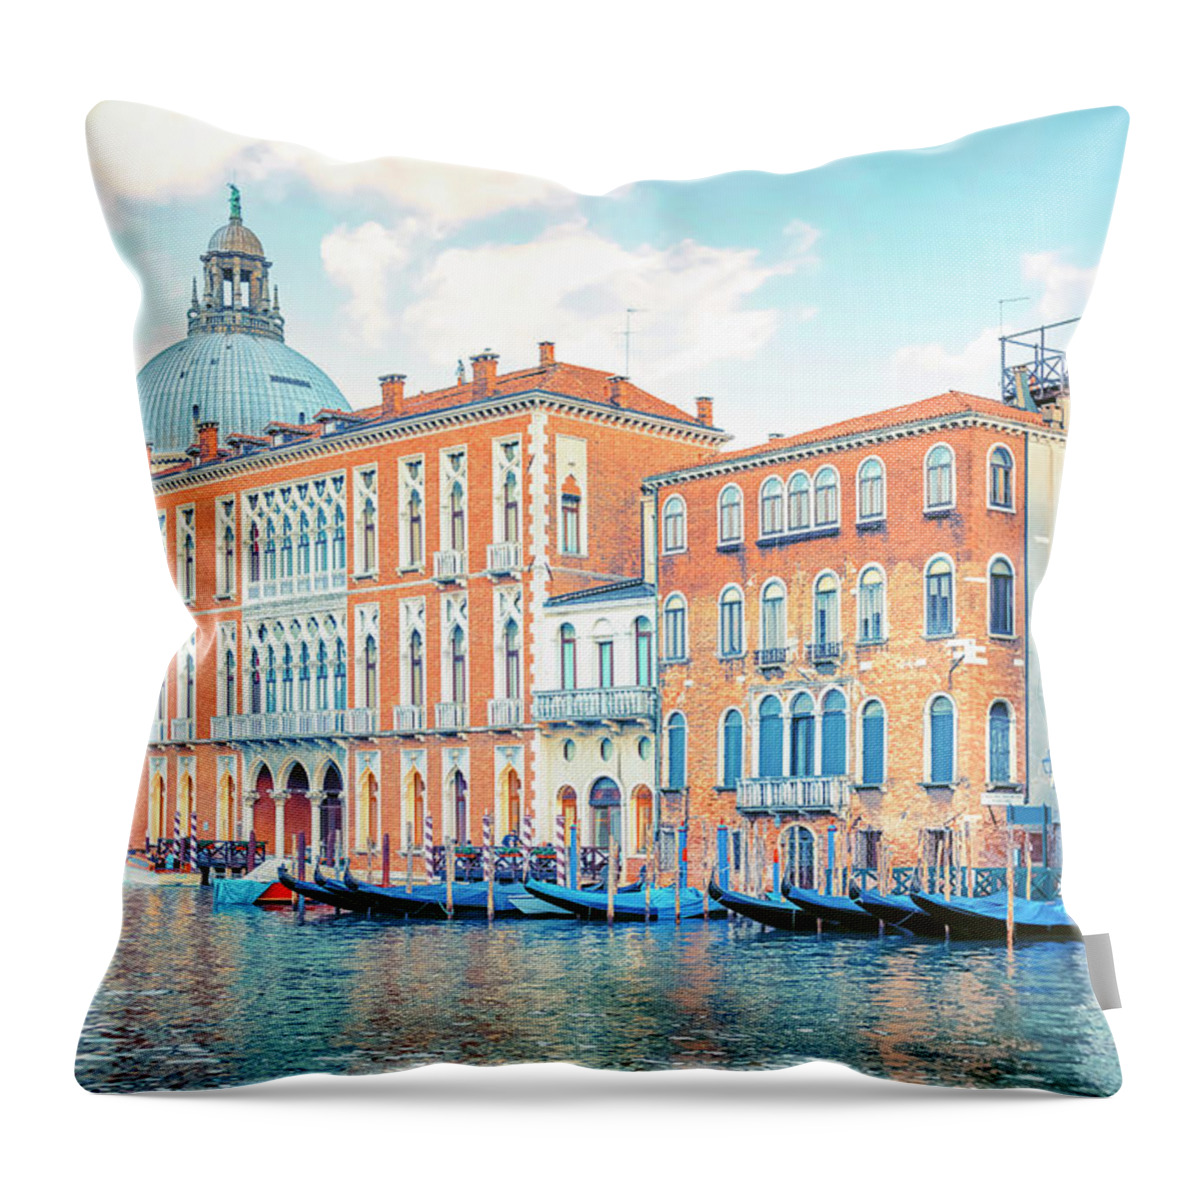 Architecture Throw Pillow featuring the photograph Grand Canal In Venice by Manjik Pictures